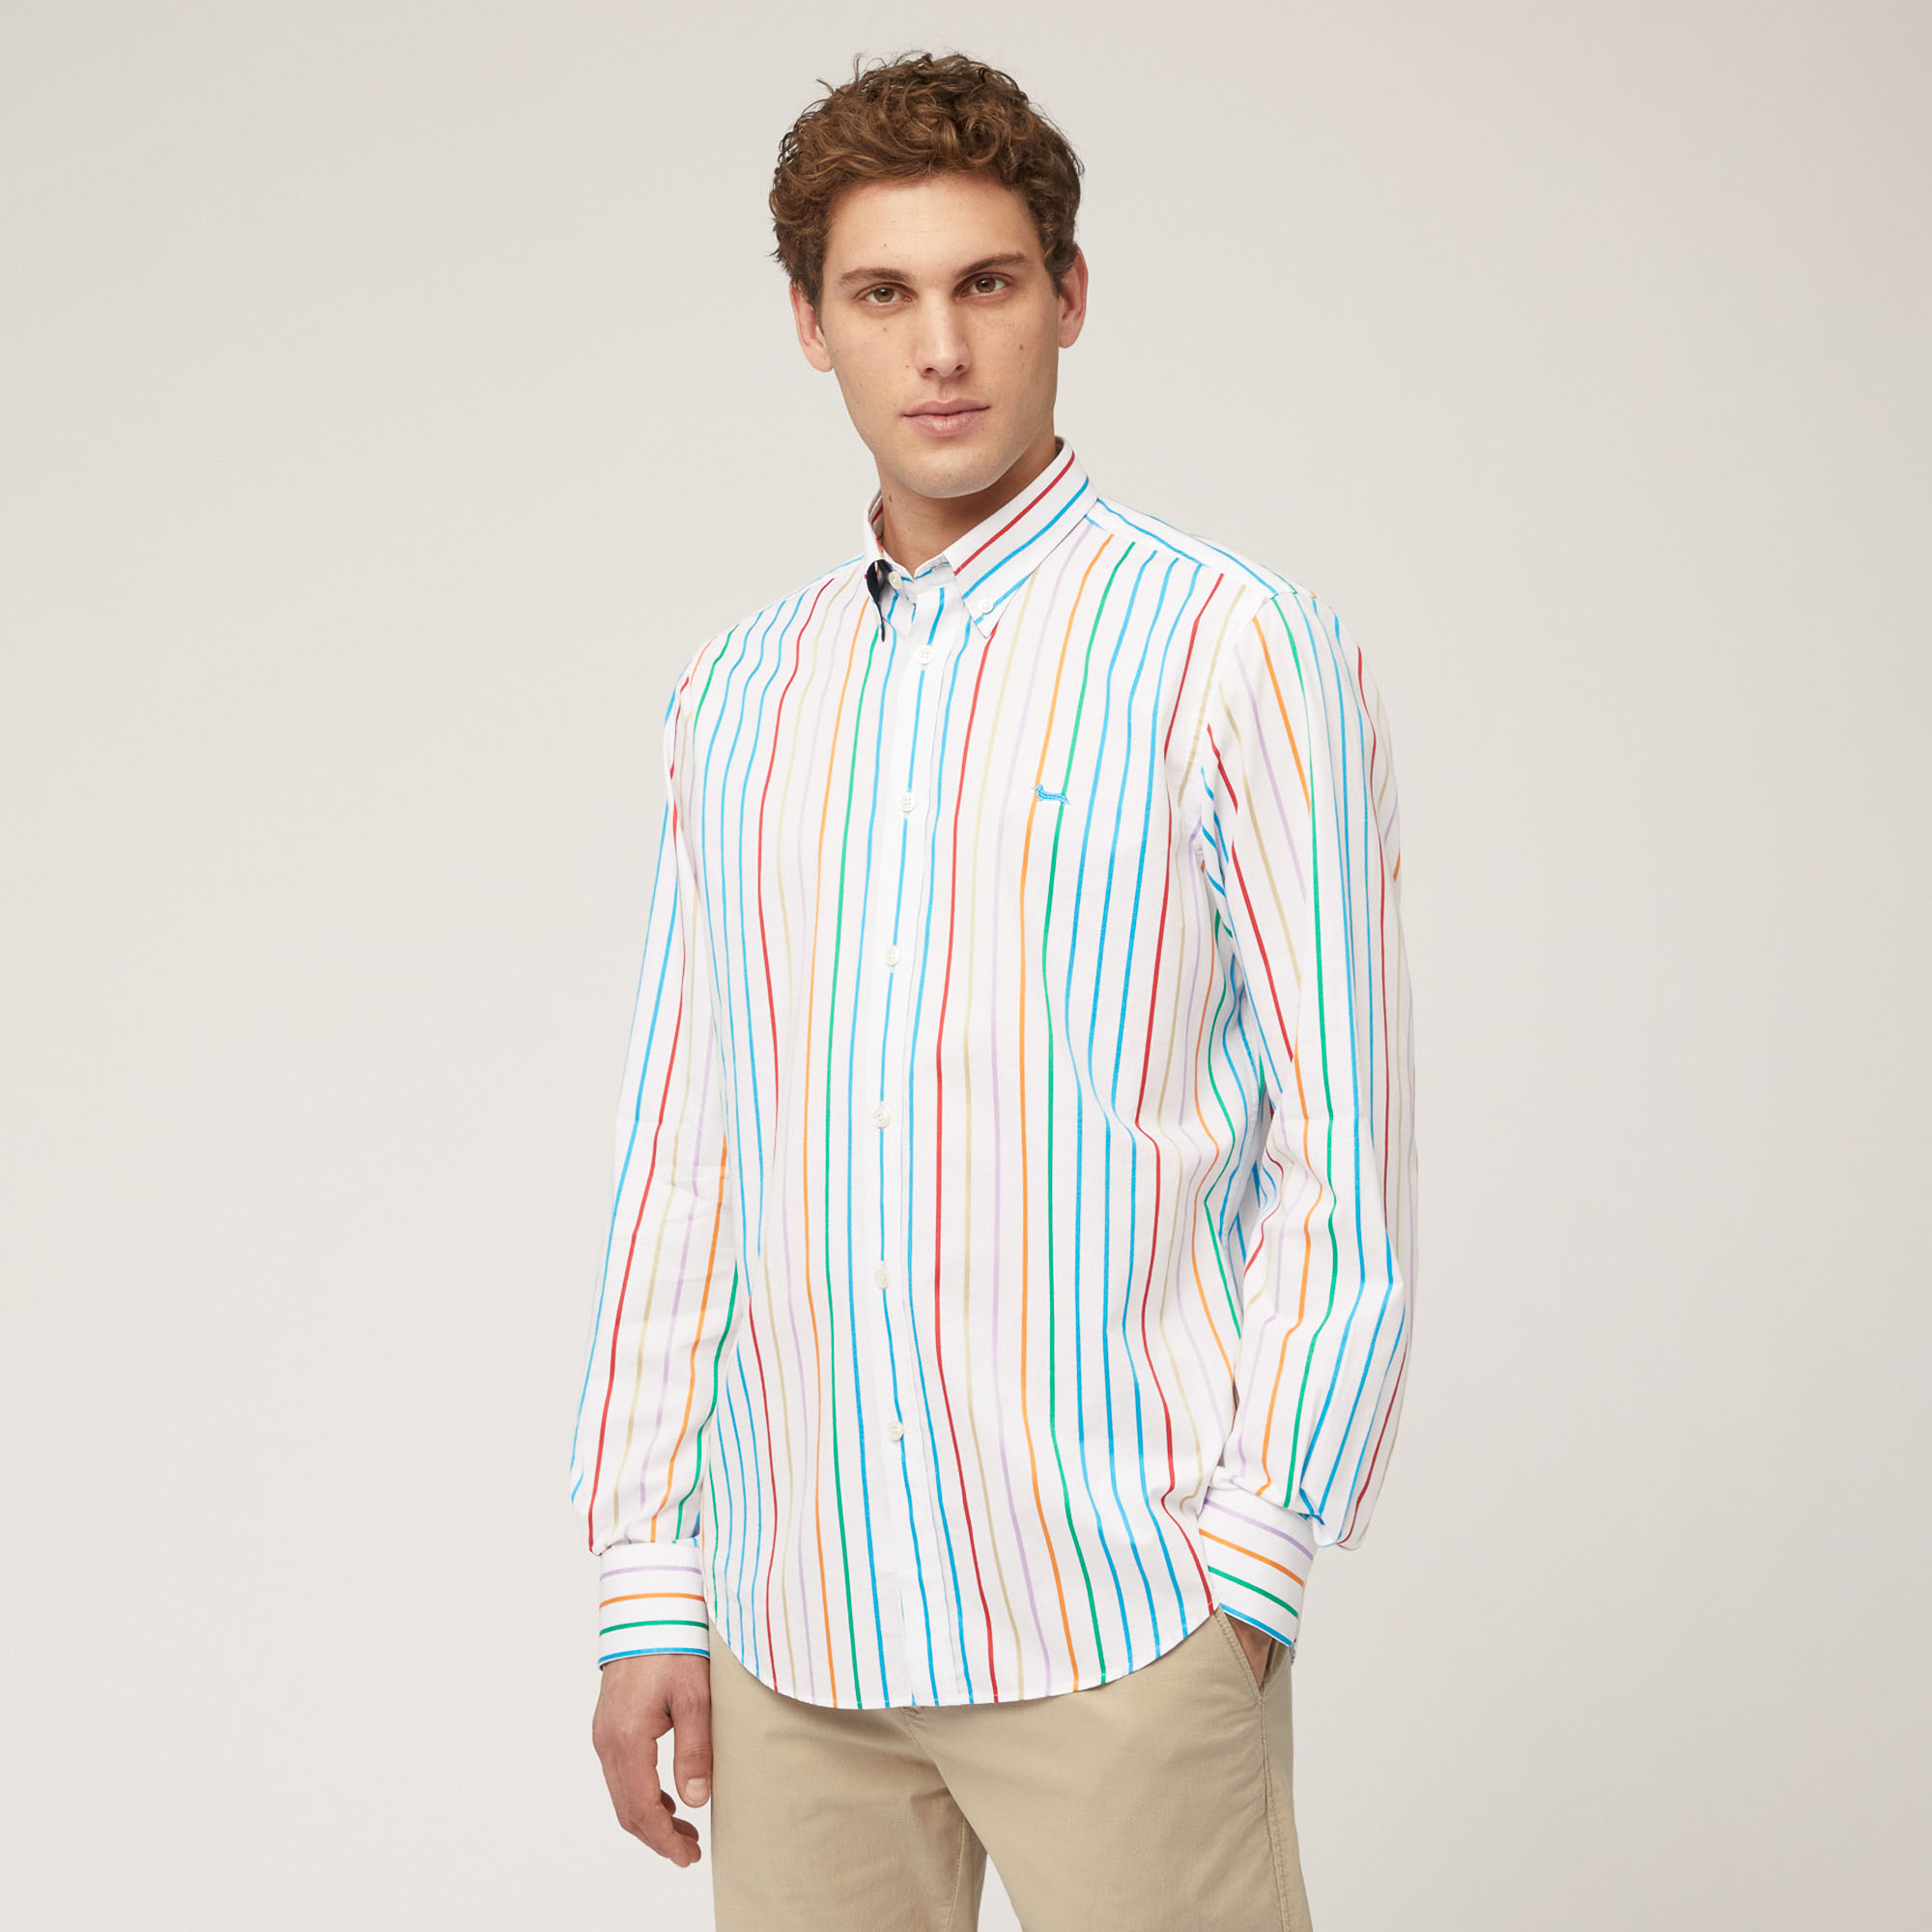 Multicolored-Stripe Cotton Shirt, White, large image number 0